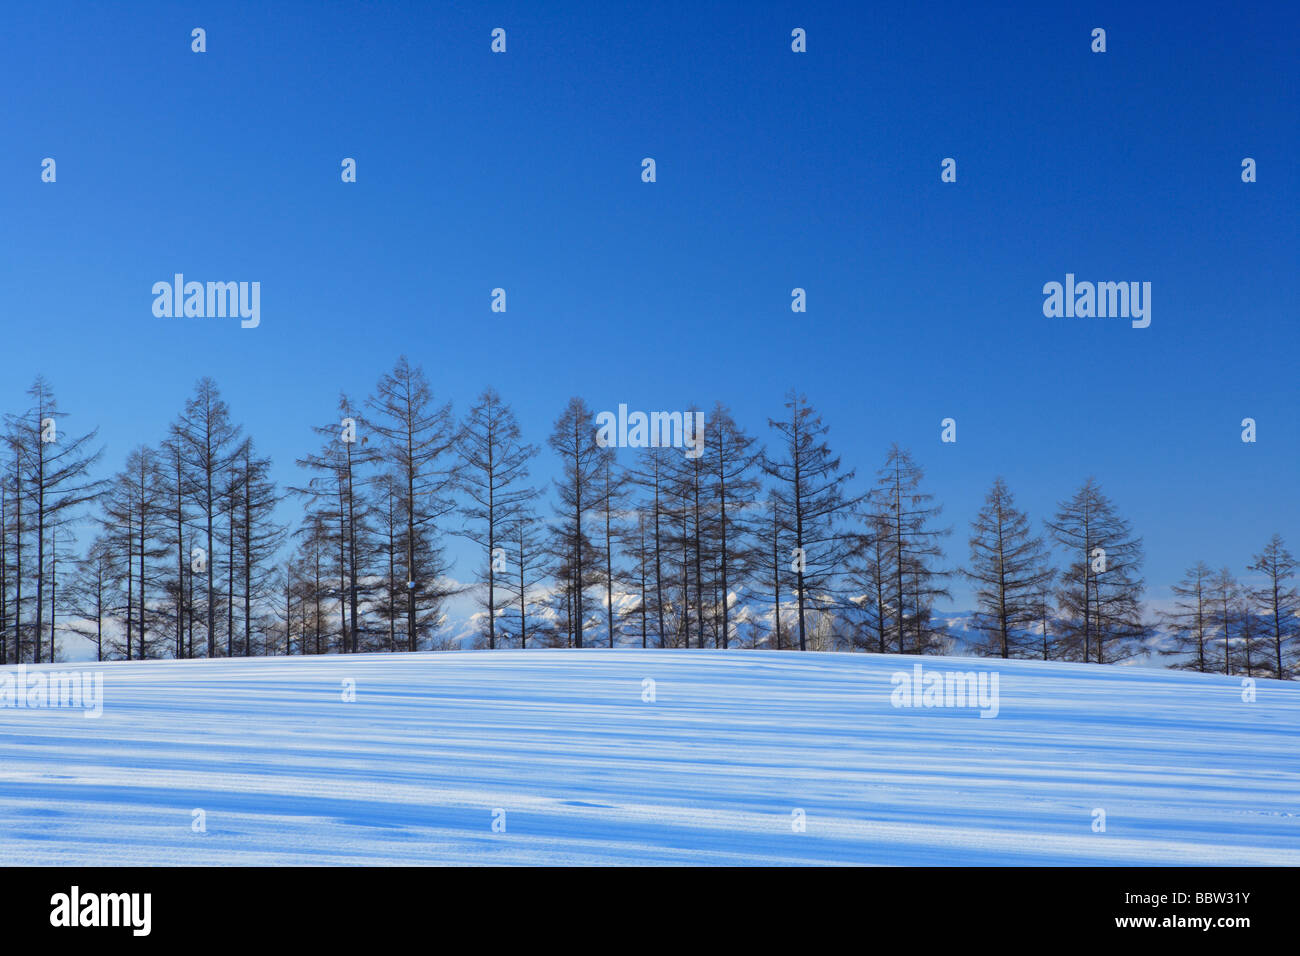 Snow-covered trees in snowfield Stock Photo